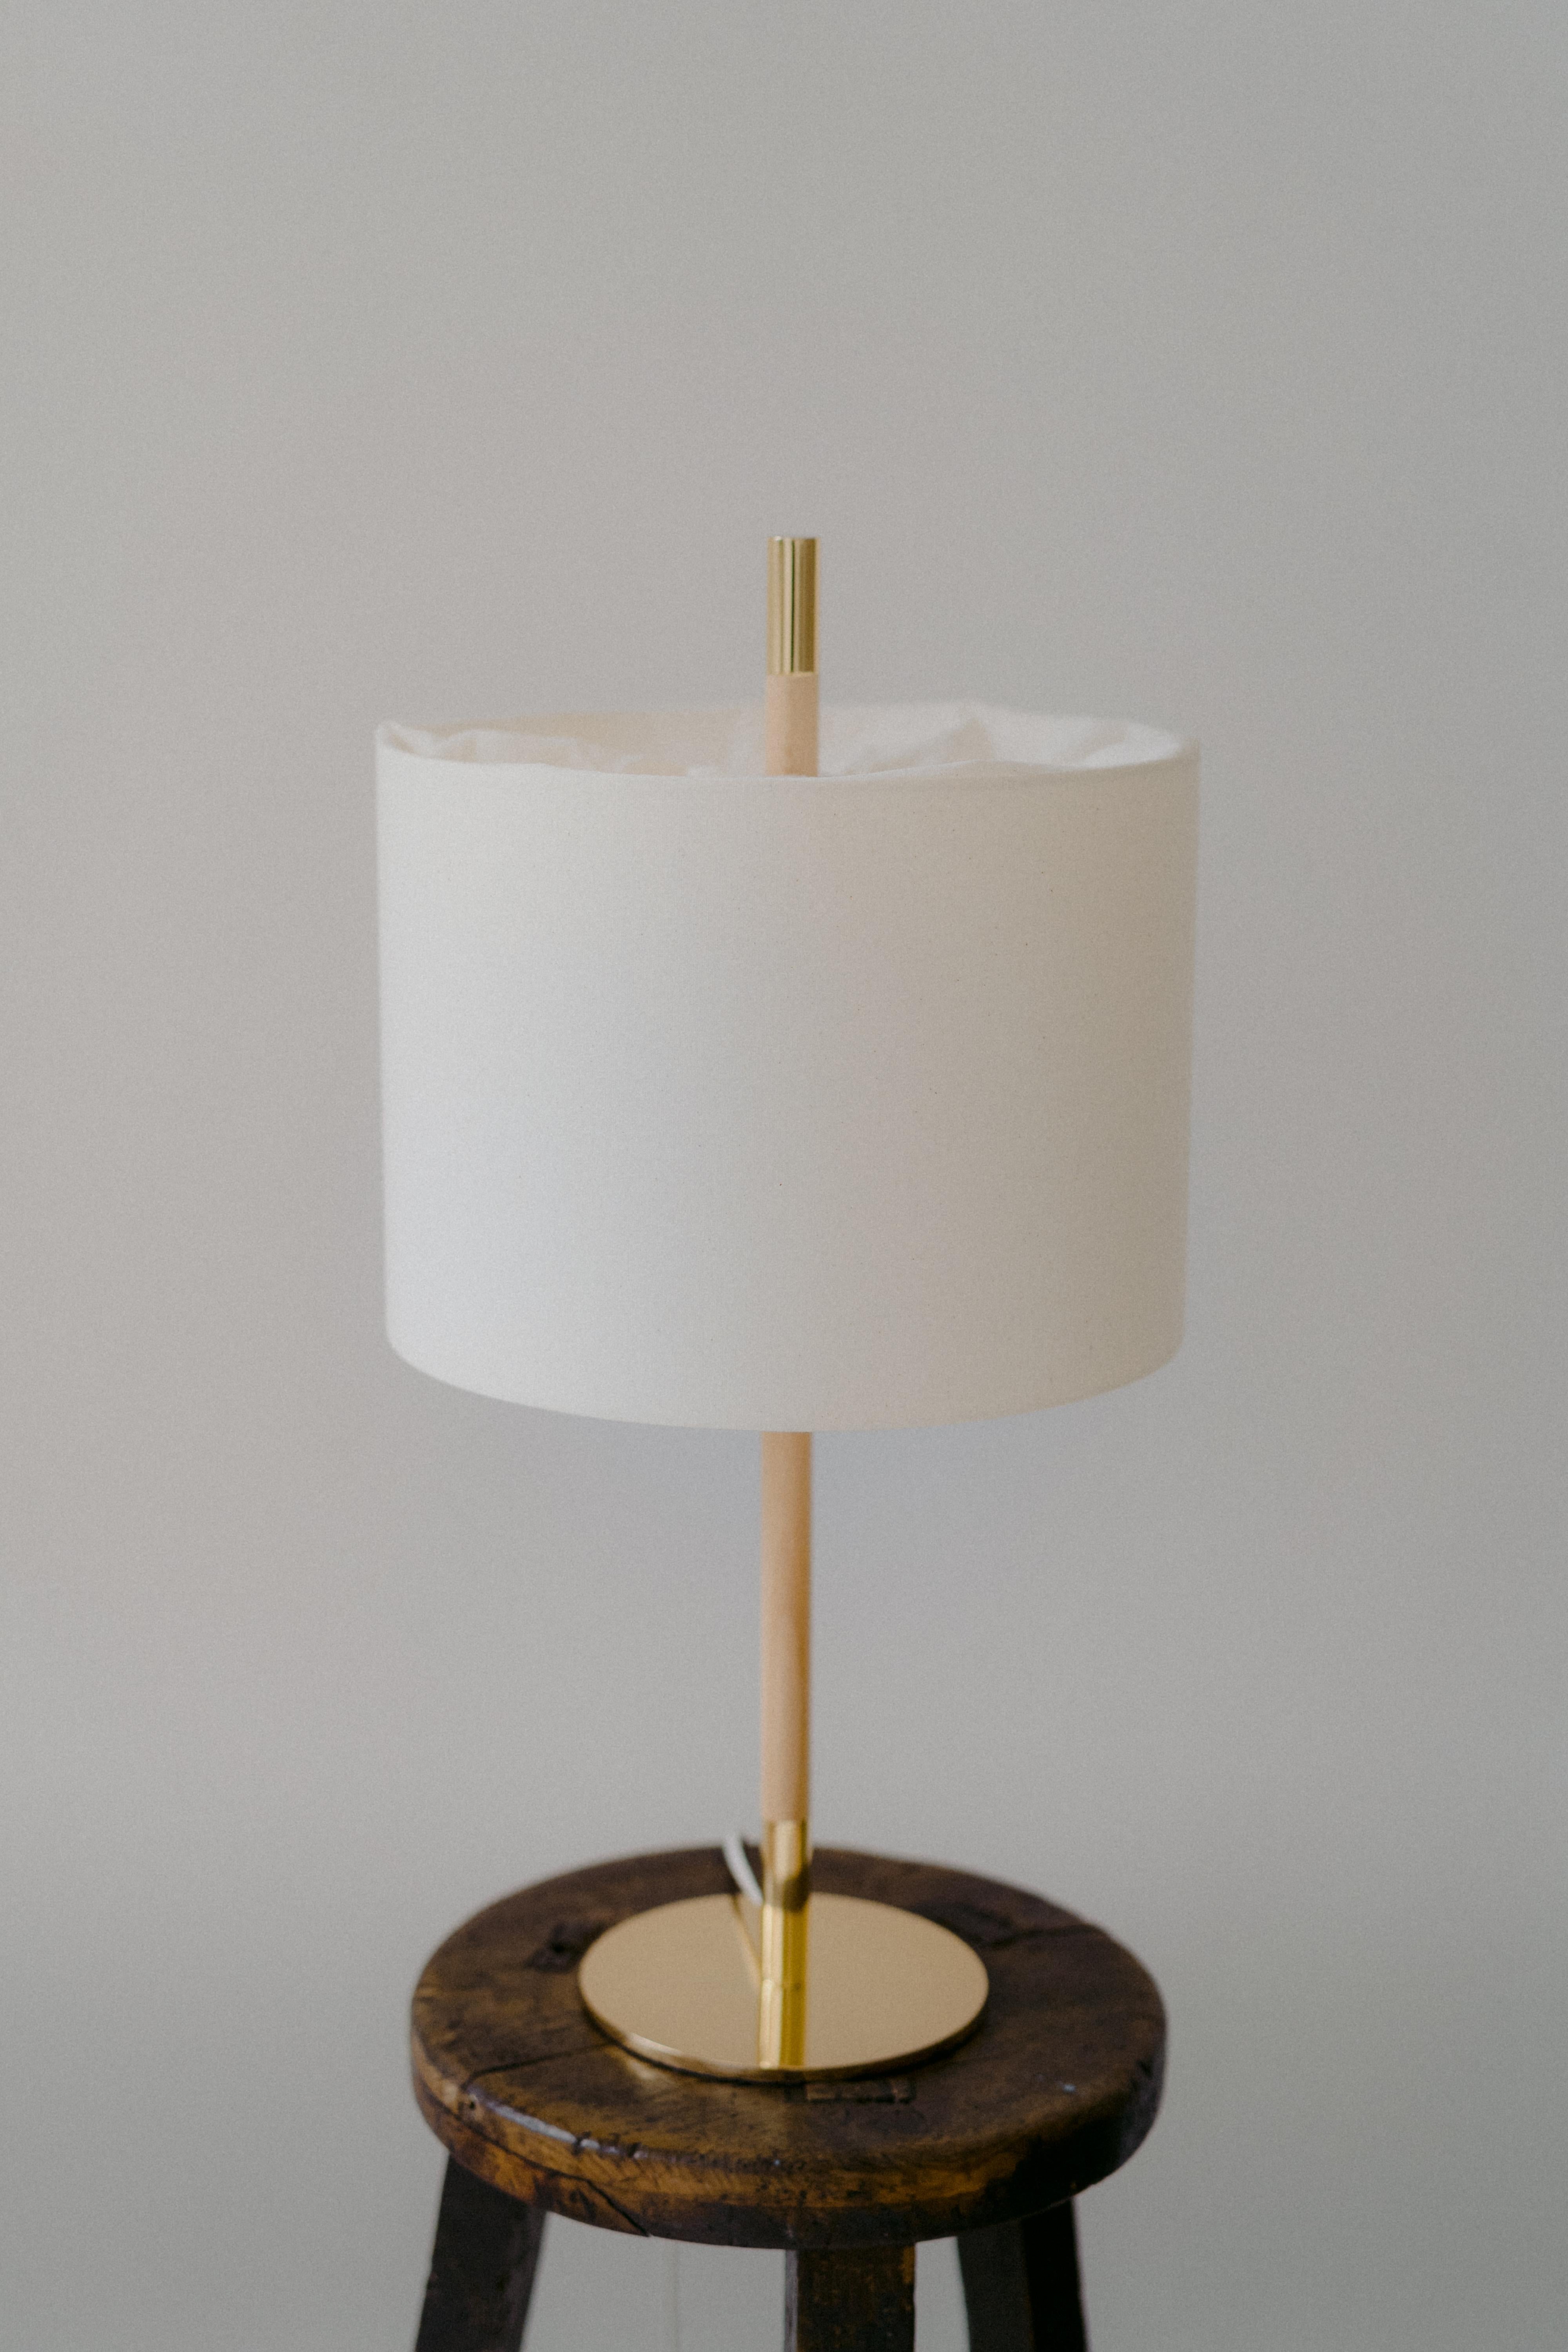 AMÀ TABLE LAMP

The Amà lamp model offers a variant with a natural textured fabric shade in white.
At the top, the fabric folds to hide the light source, creating a unique detail.
As in the rattan version, its foot combines polished brass with